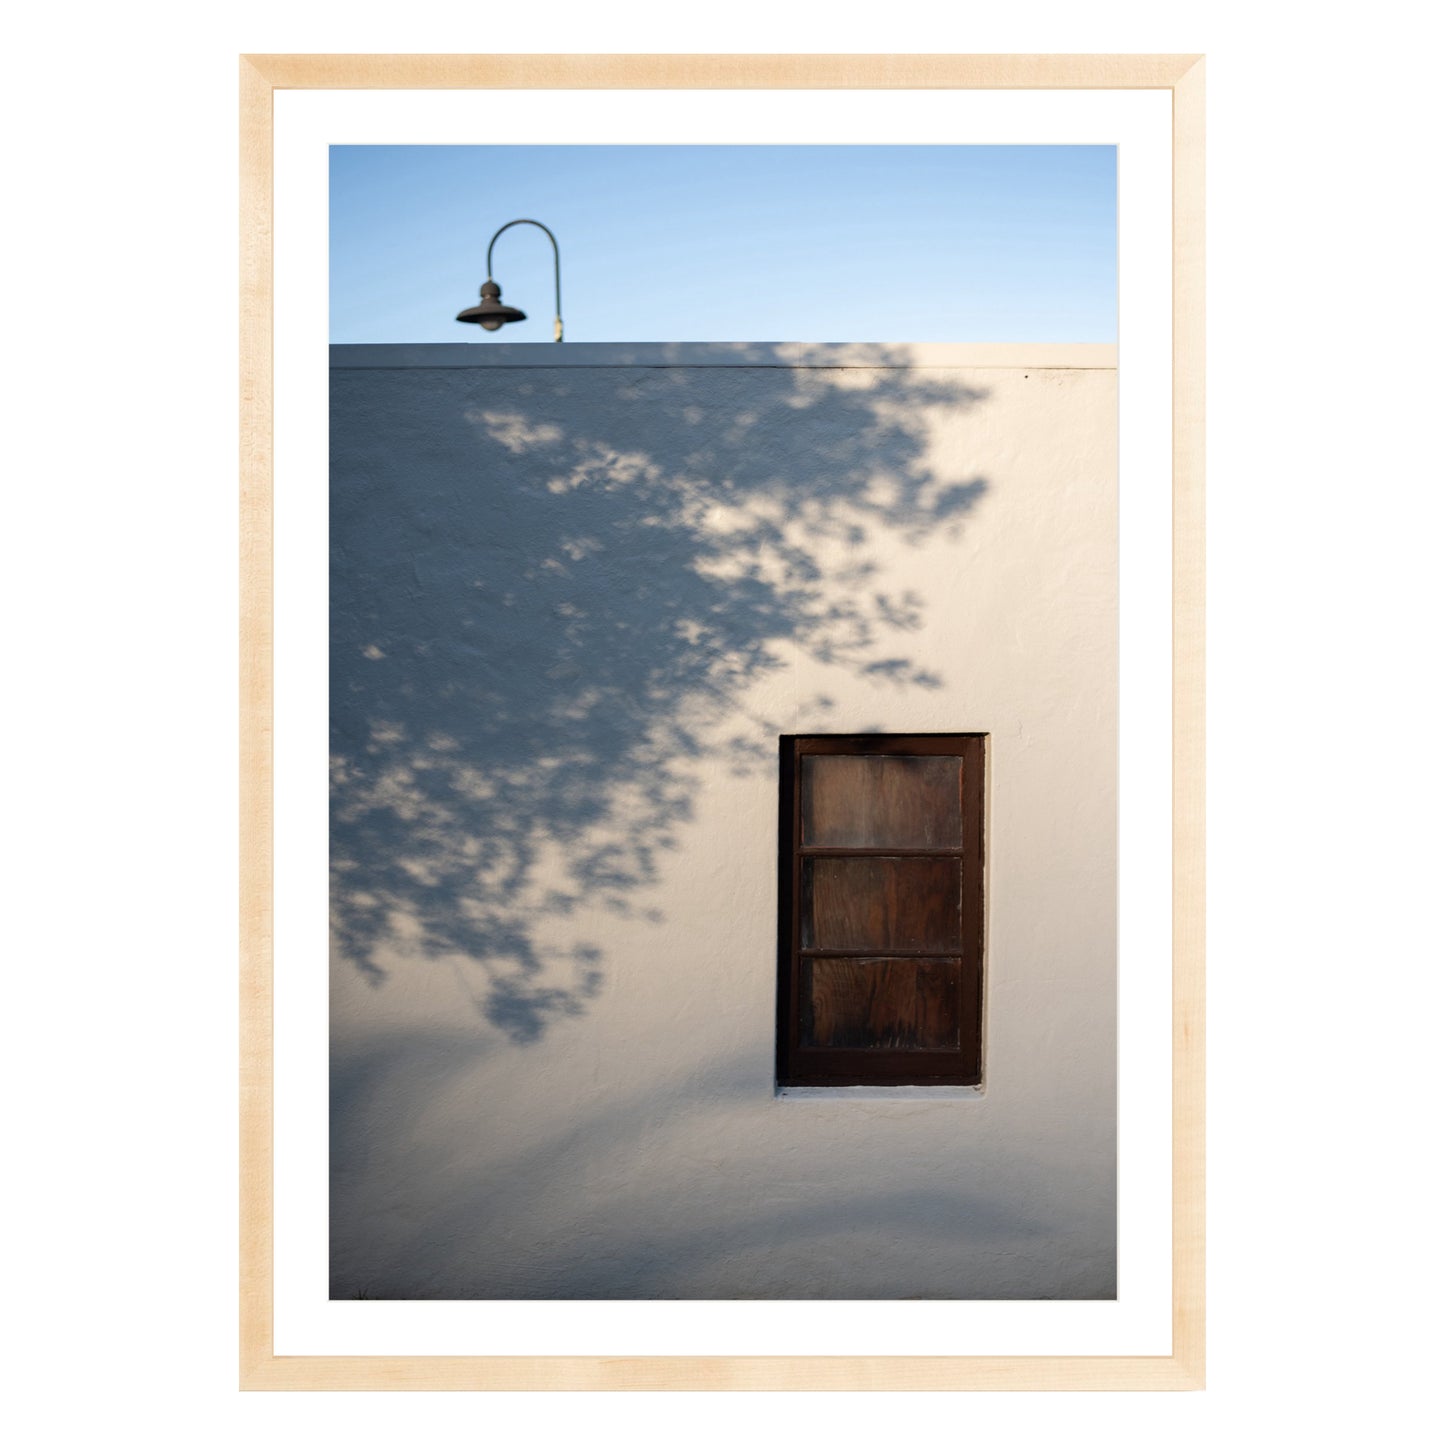 Photograph of shadows on building in San Francisco Presidio in natural wood frame with white mat